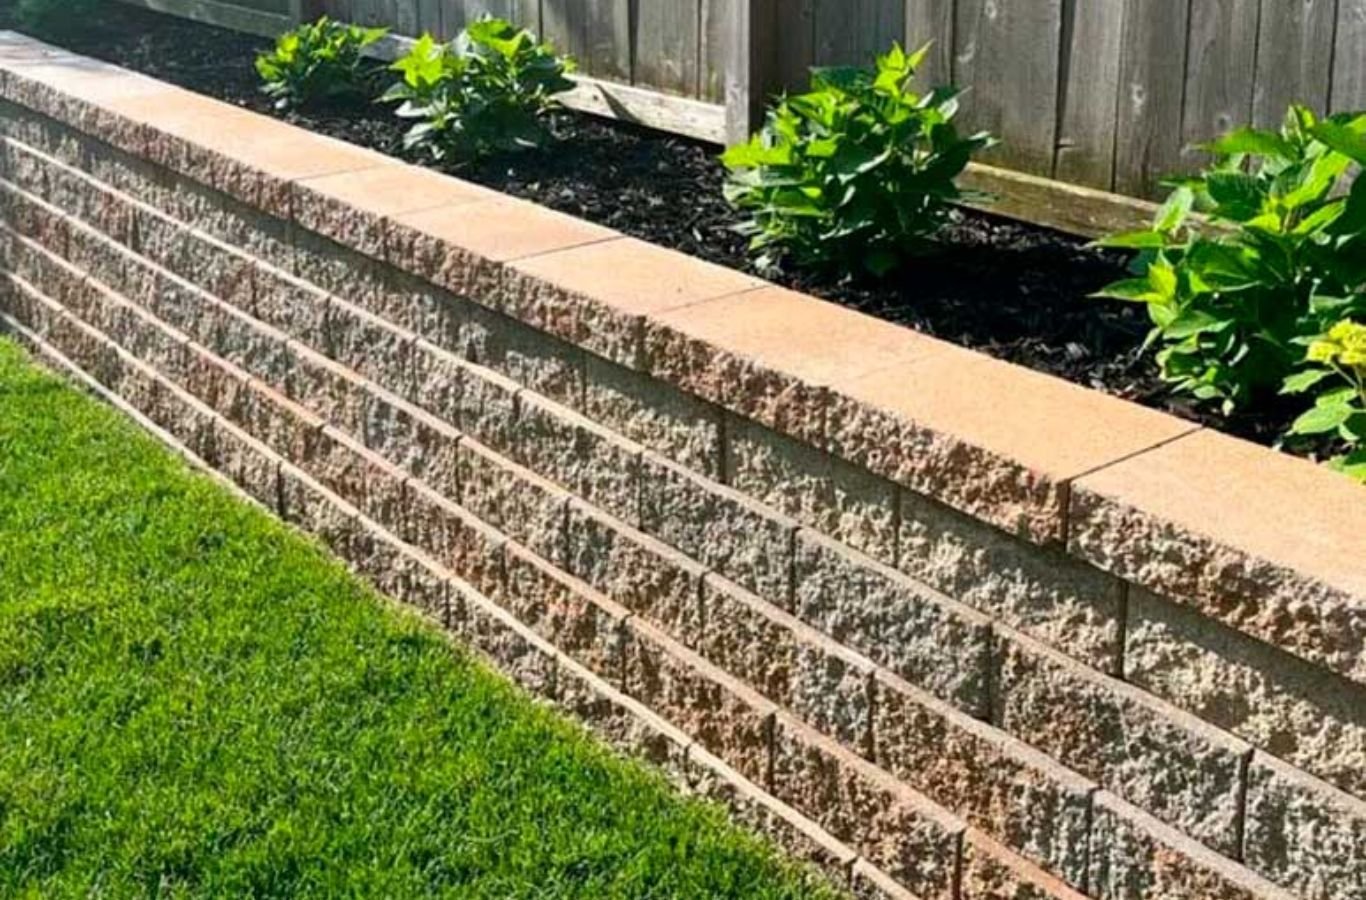 Customized retaining wall designs enhancing Homewood landscapes